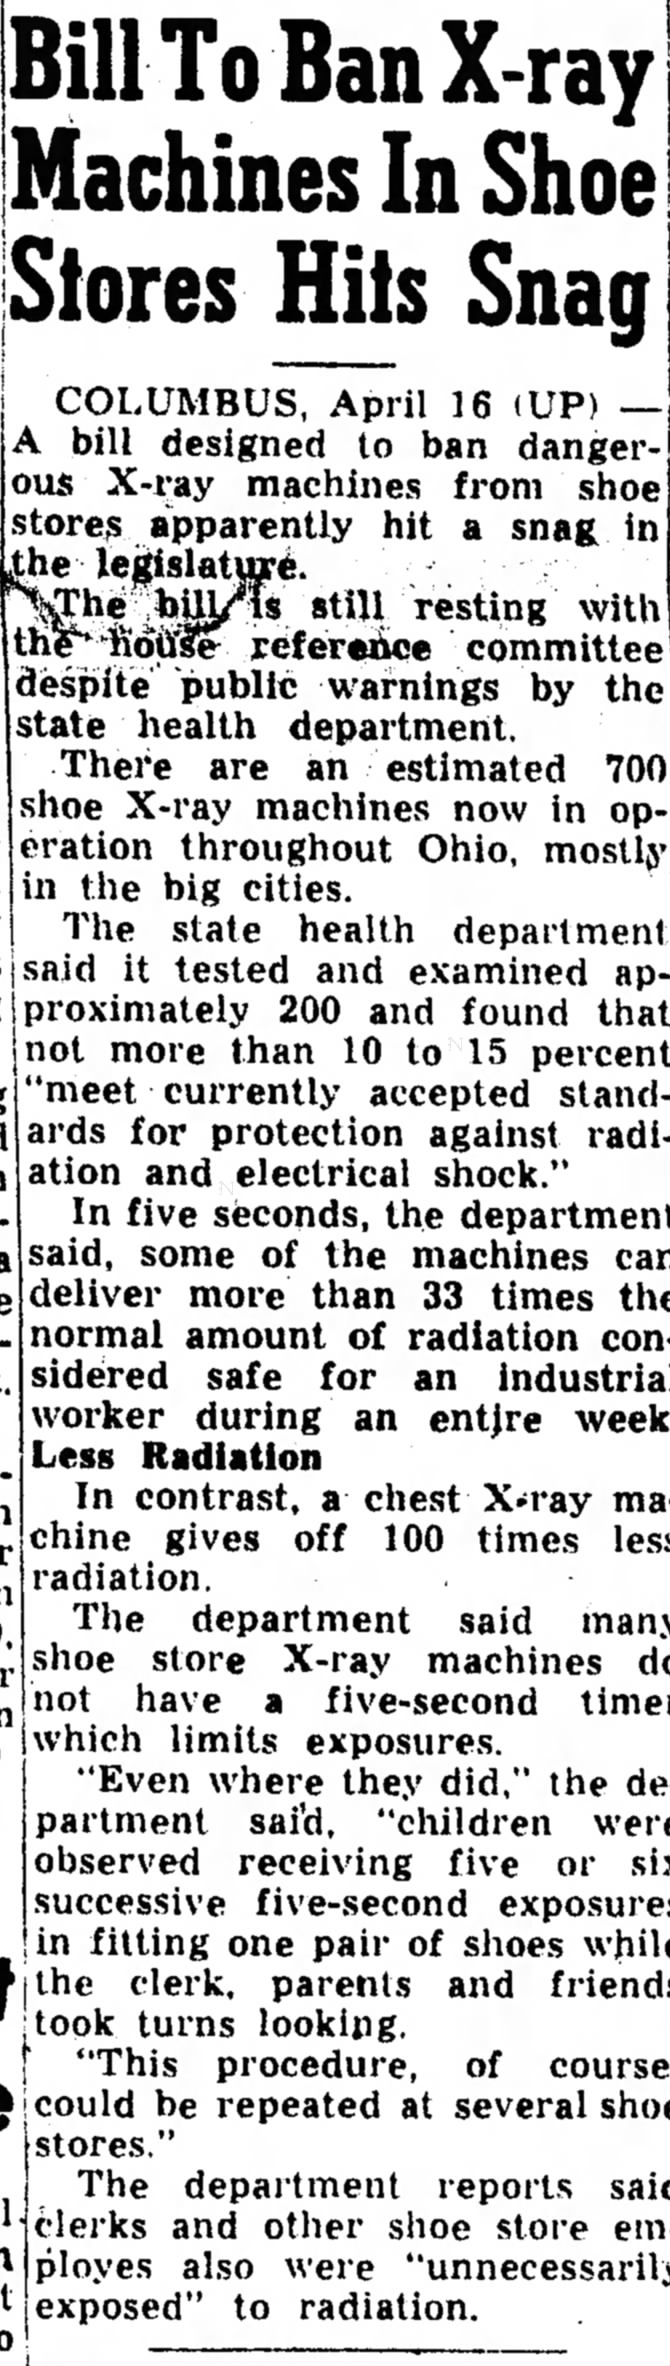 Bill to ban x-ray machines in shoe stores hits snag, Ohio (1957)